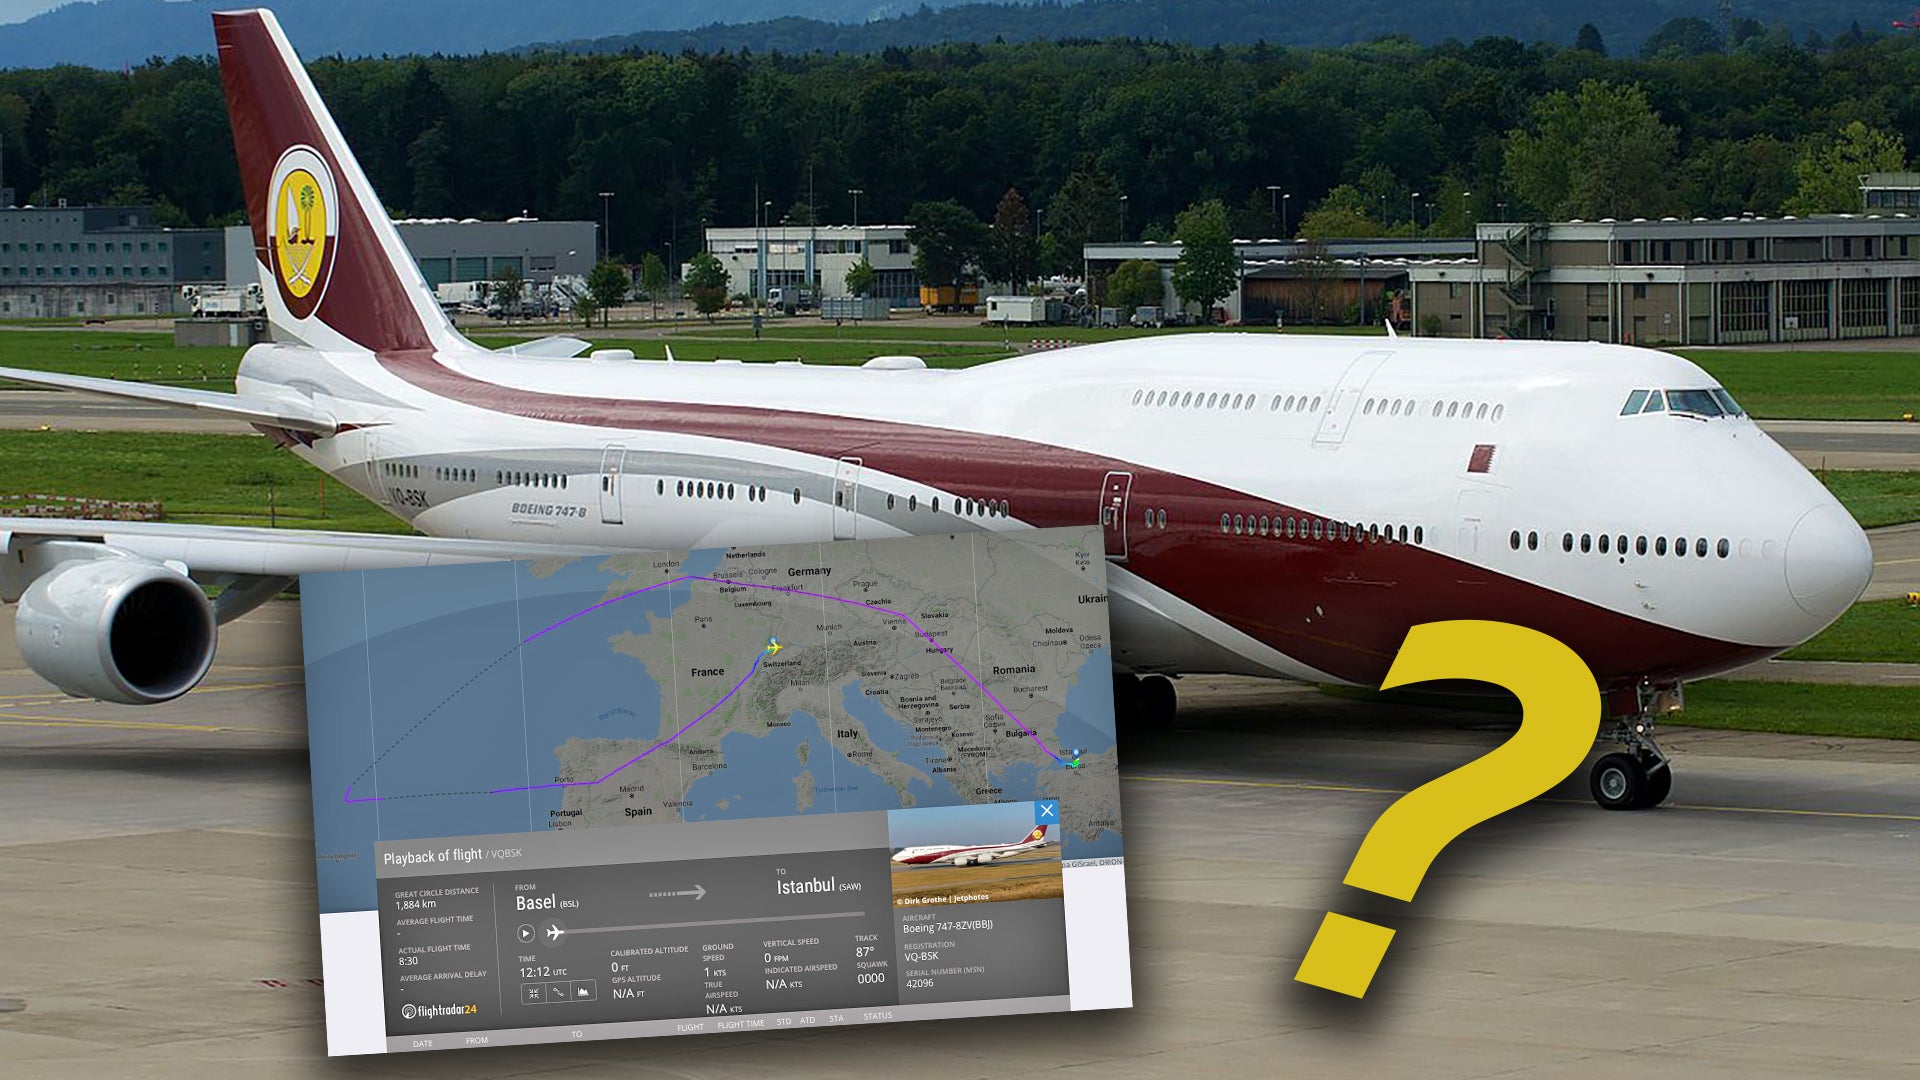 That Qatari Royal Flight 747-8i That’s Up For Sale Just Made A Very Strange Flight To Istanbul